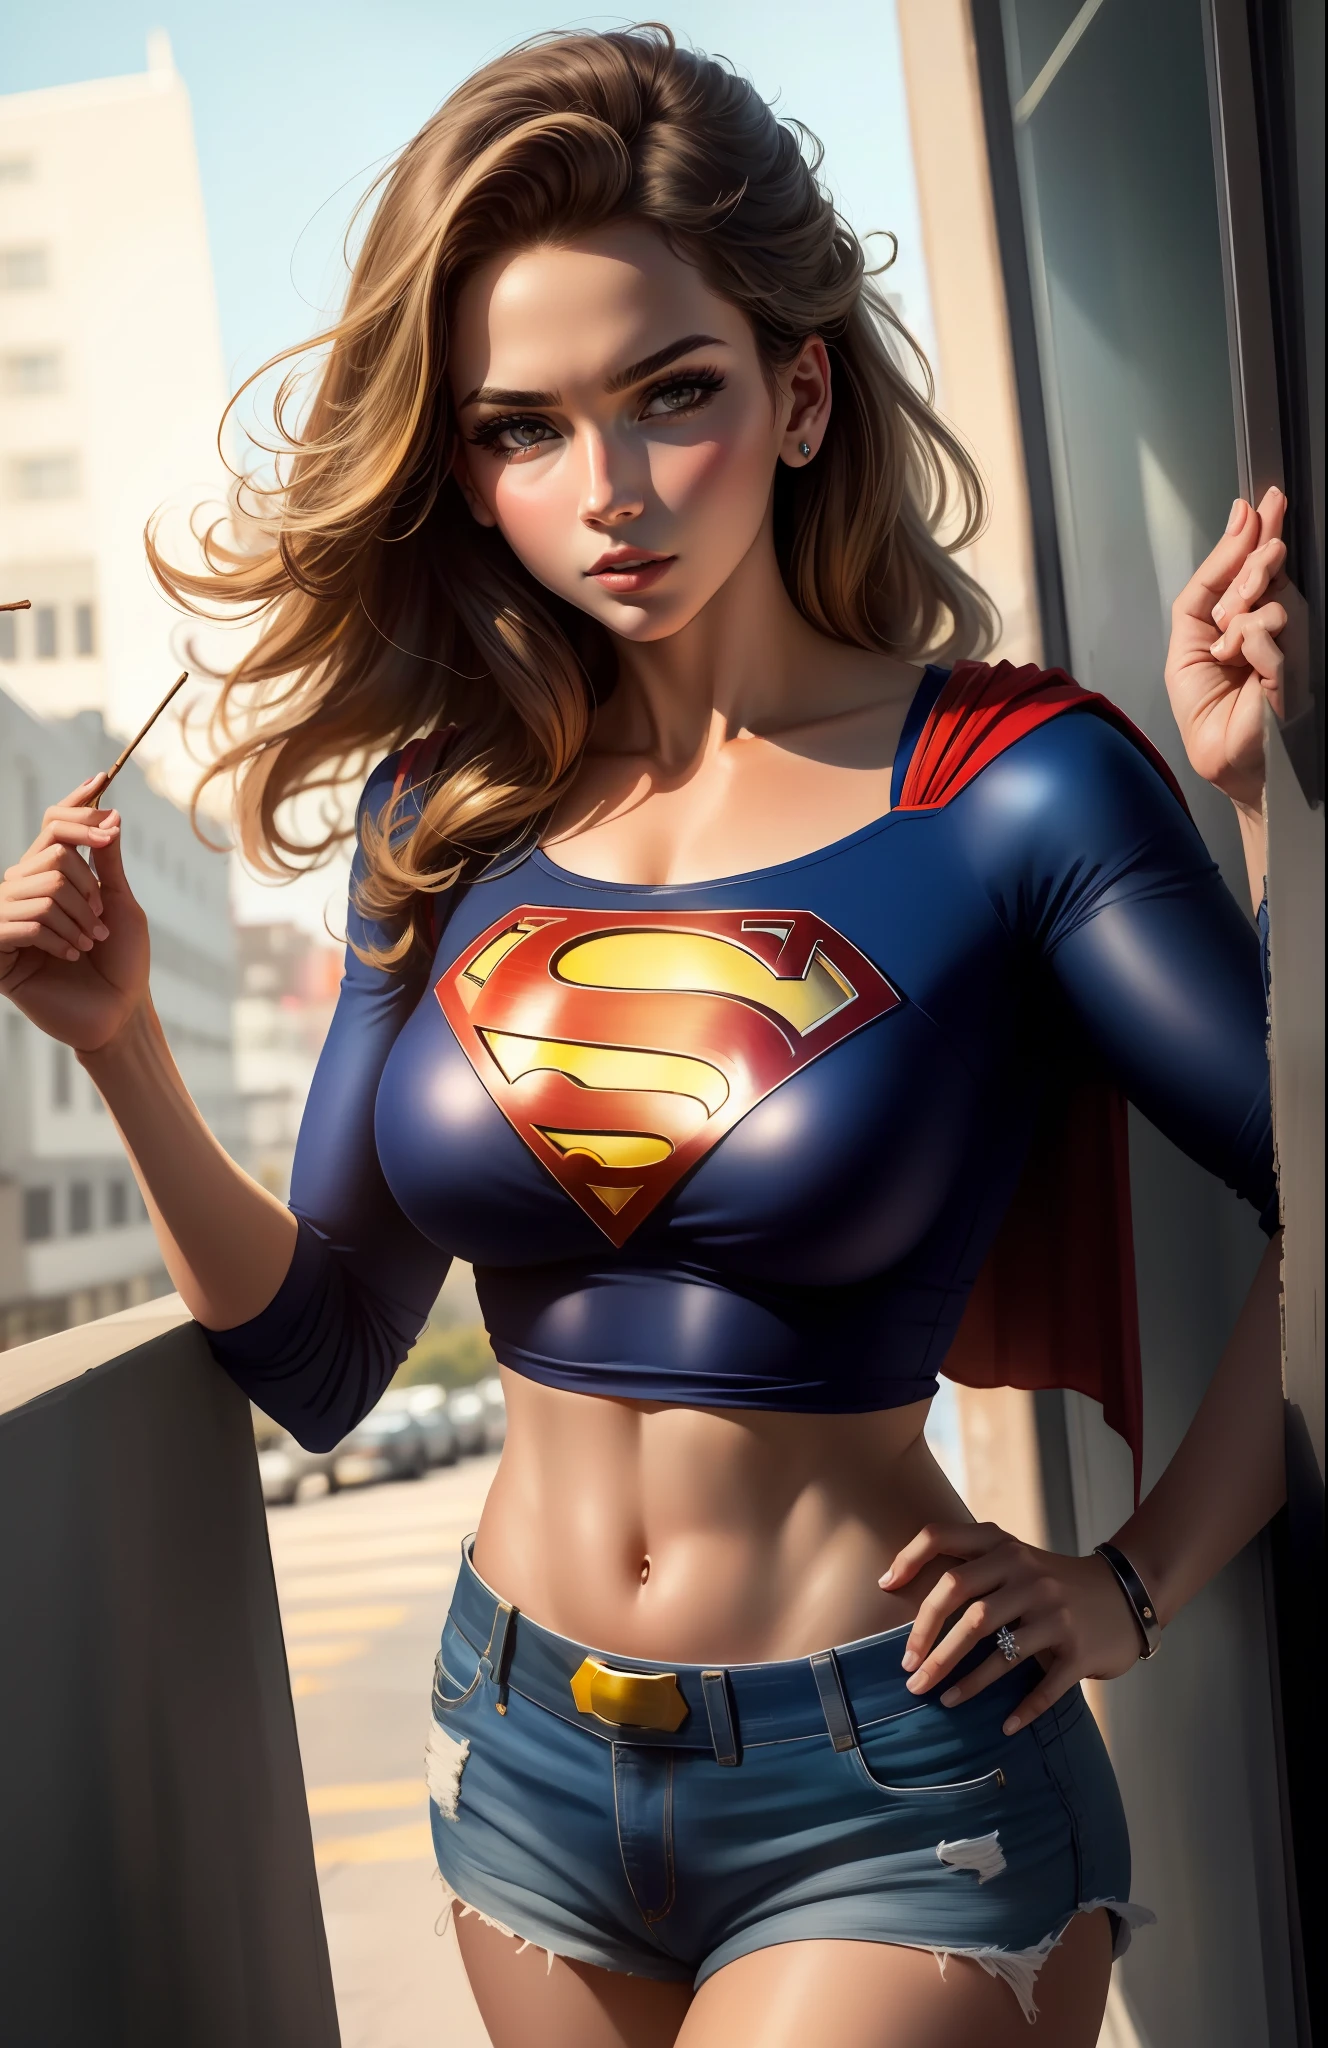 (), big boobies,(Masterpiece artwork), best qualityer, extremely detaild, (water colour), flowers, delicate and beautiful, illustration, (from low),(1 blonde:1.4), (soli:1.2), breasts big, (wet blouse with Superman letter S:1.3), off-shoulder wet blouse, (short shorts:1.2), bared shoulders, (underboob:1.2), Beautiful  eyes, pawg, (extremely long shaggy curly hair), fot, over shoulder shot, por Alex Maleev, proffesional, Canon Camera, Nikon Camera, Sharp, bokeh,  studio quality, Fish-eye lens, by Robert Capa , stick out tongue, blue colored eyes. Superman symbol in the background.